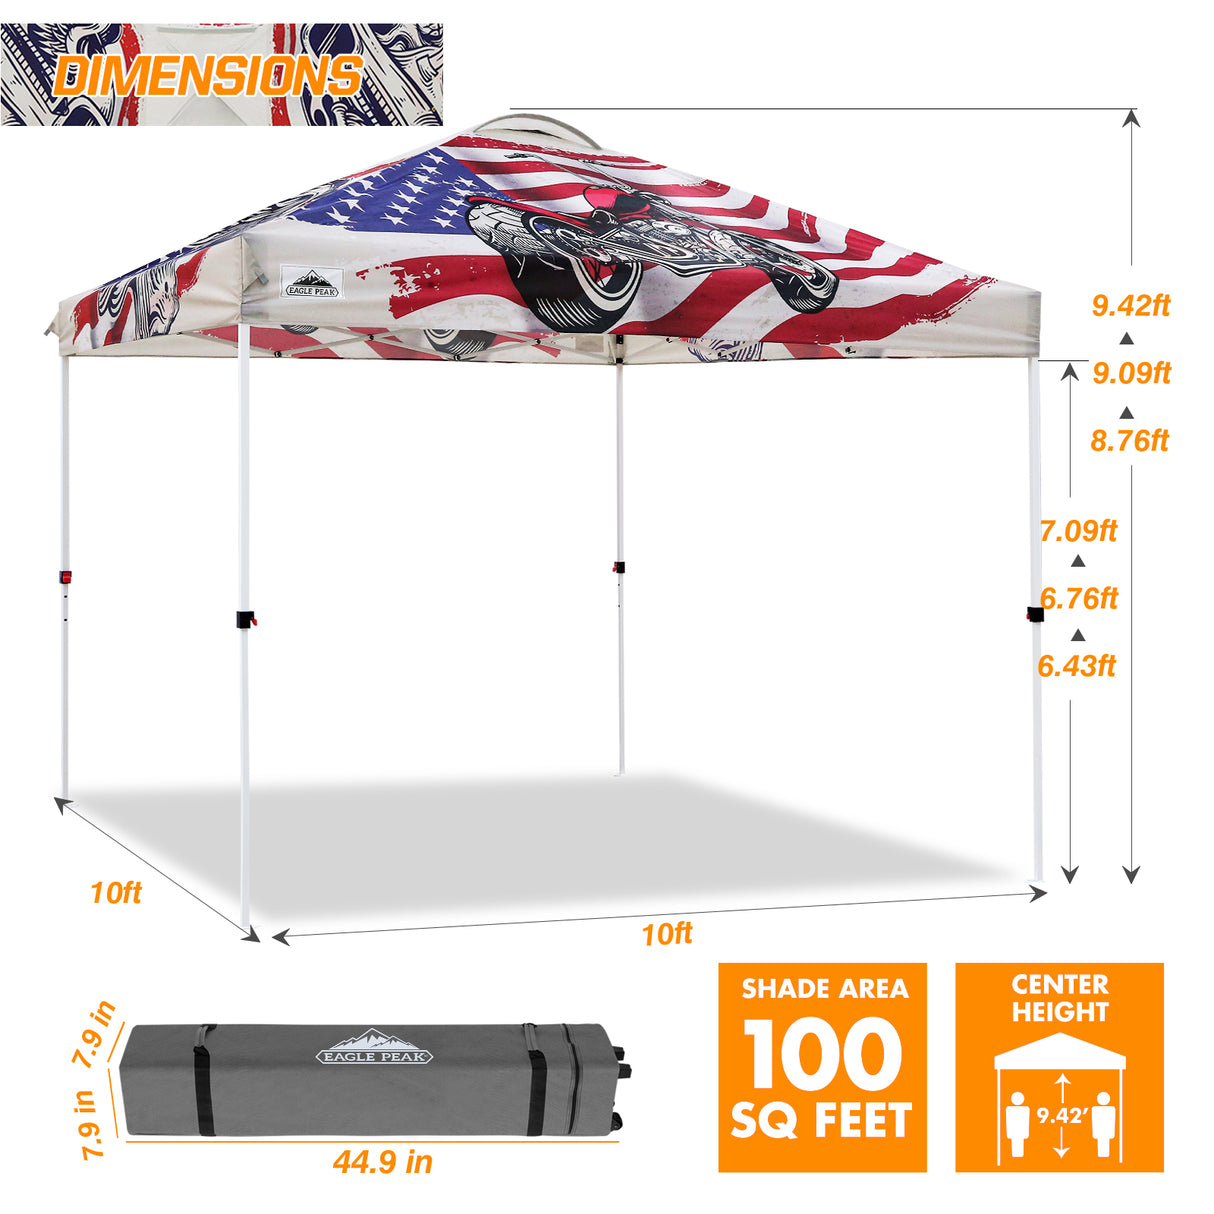 EAGLE PEAK 10x10 Pop Up Canopy, Instant Outdoor Canopy Tent, Straight Leg Pop Up Tent for Parties, Camping, The Beach and More, 100 Square Feet of Shade, Motorcycle Skull